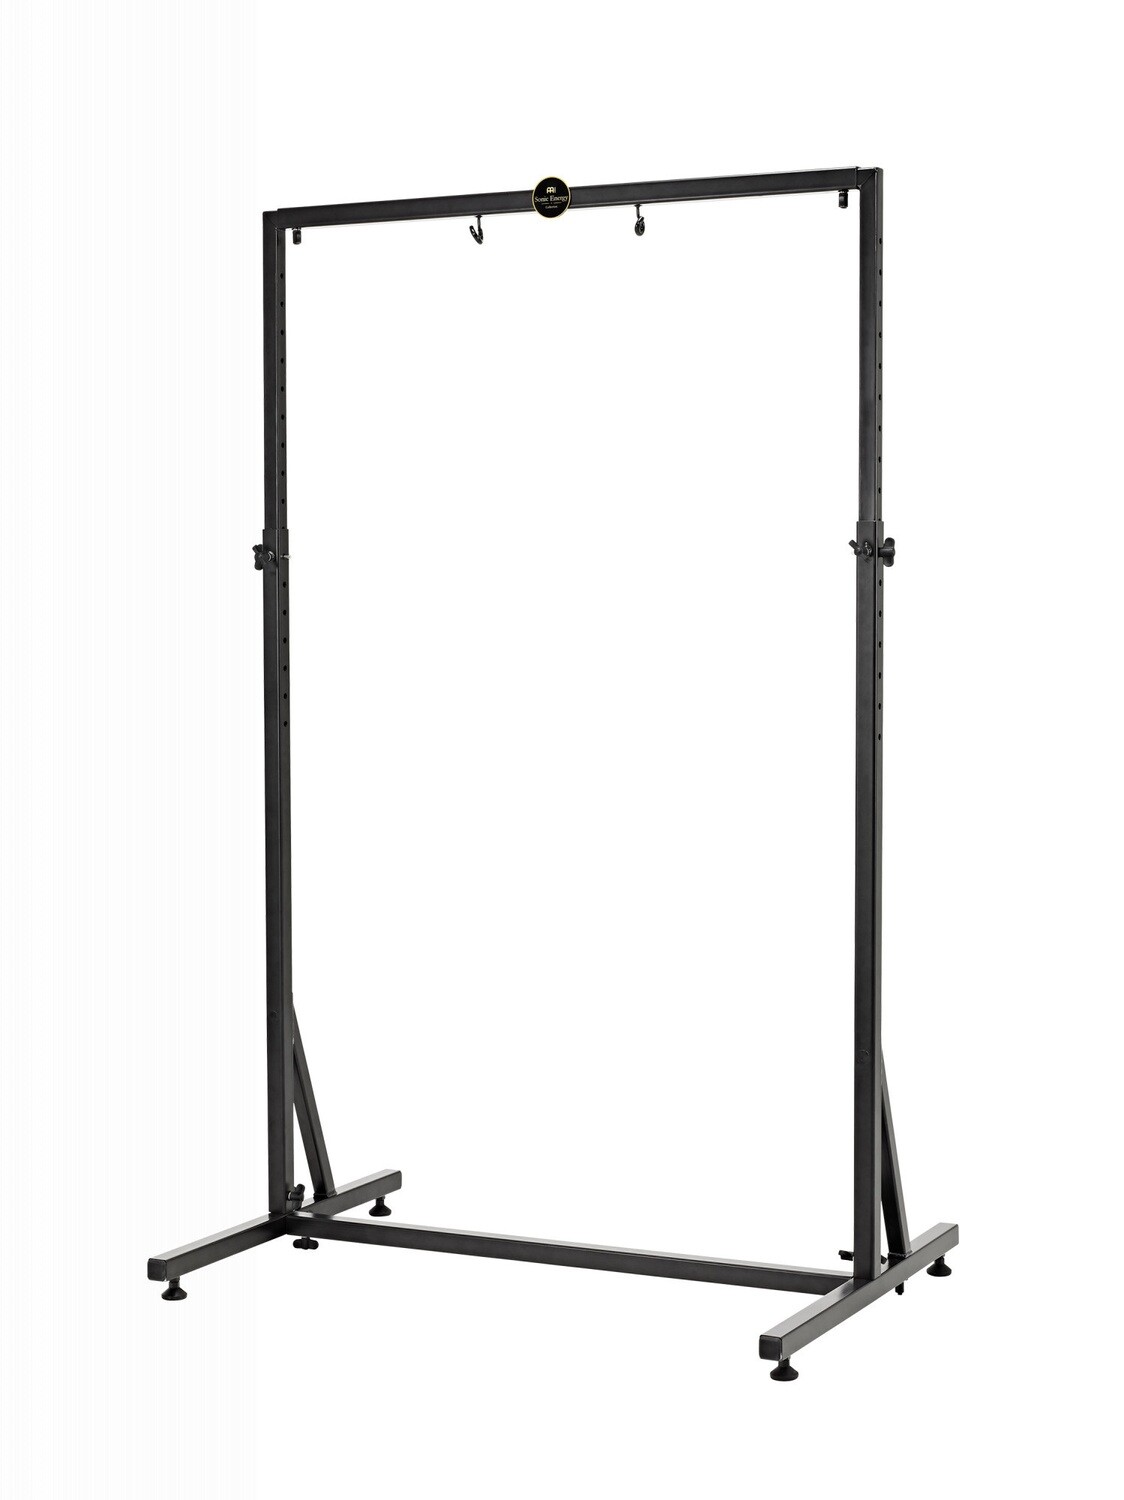 Gong / Tam Tam Stand - Up to 40" / 100 cm